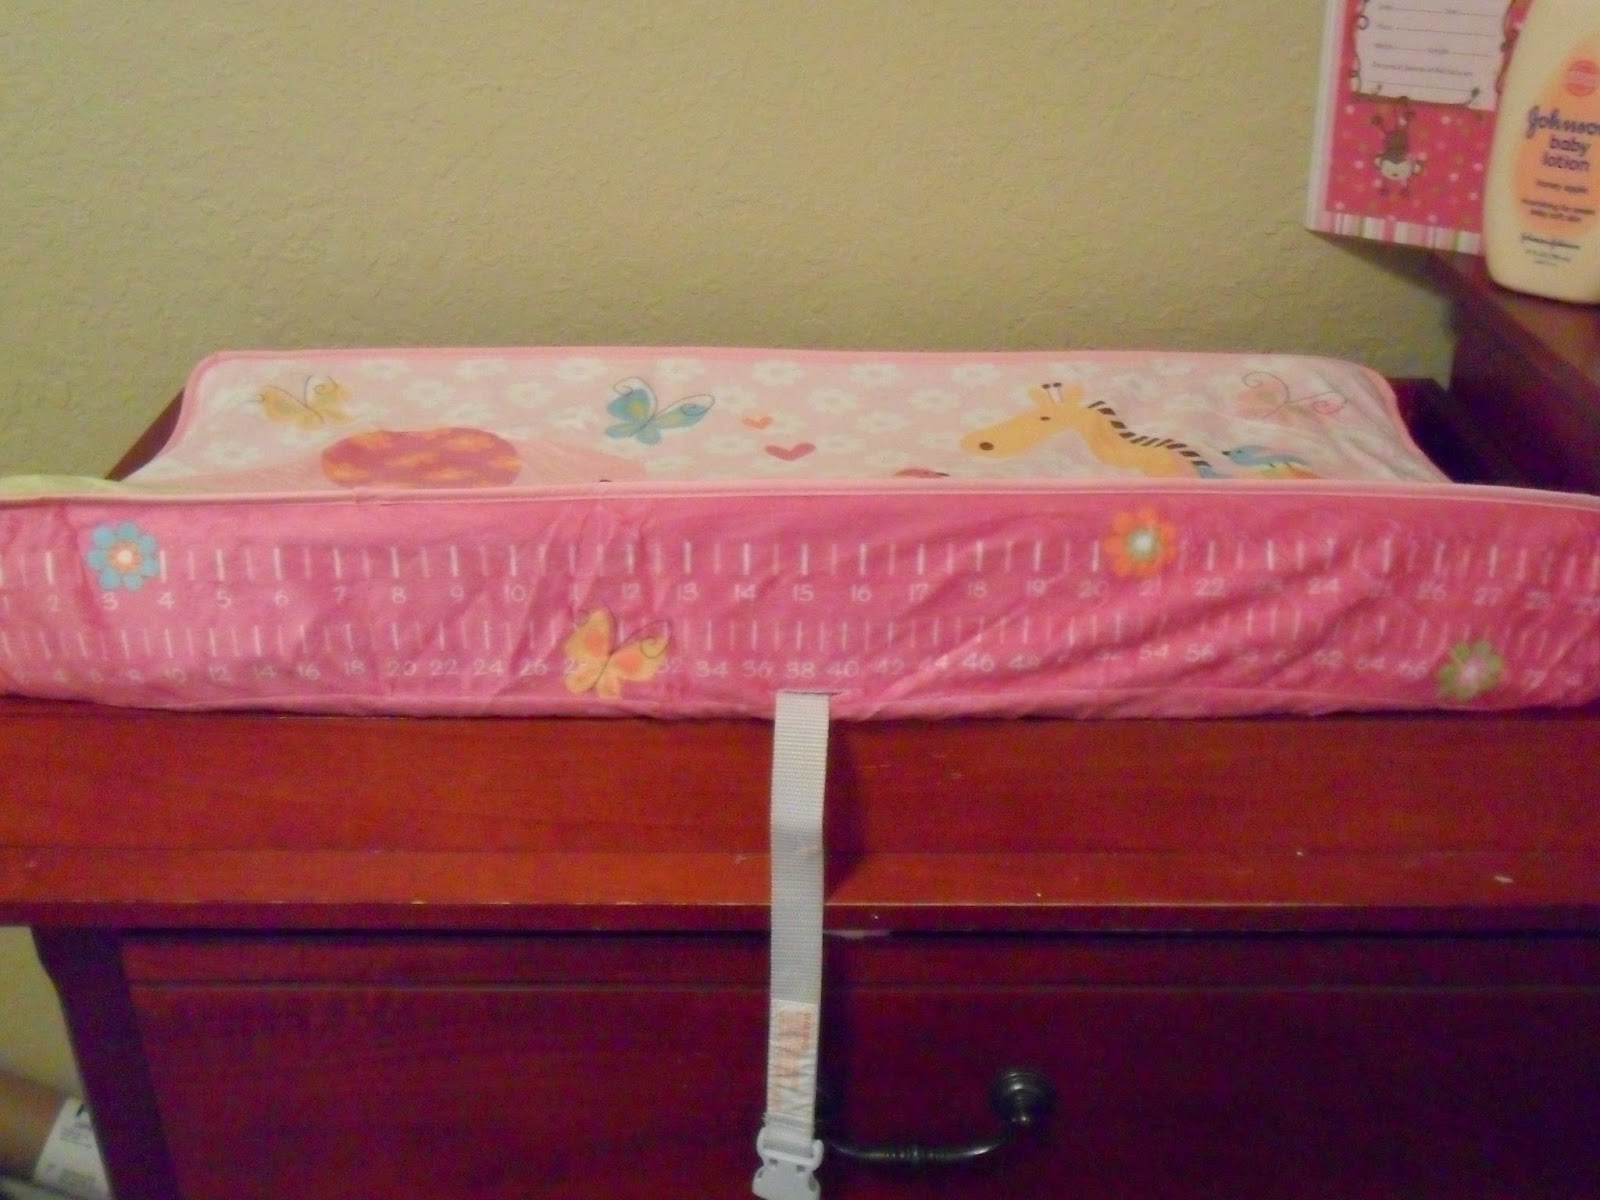 Baby' Journey Measure me changing pad cover. Review (Blu me away or Pink of me Event)